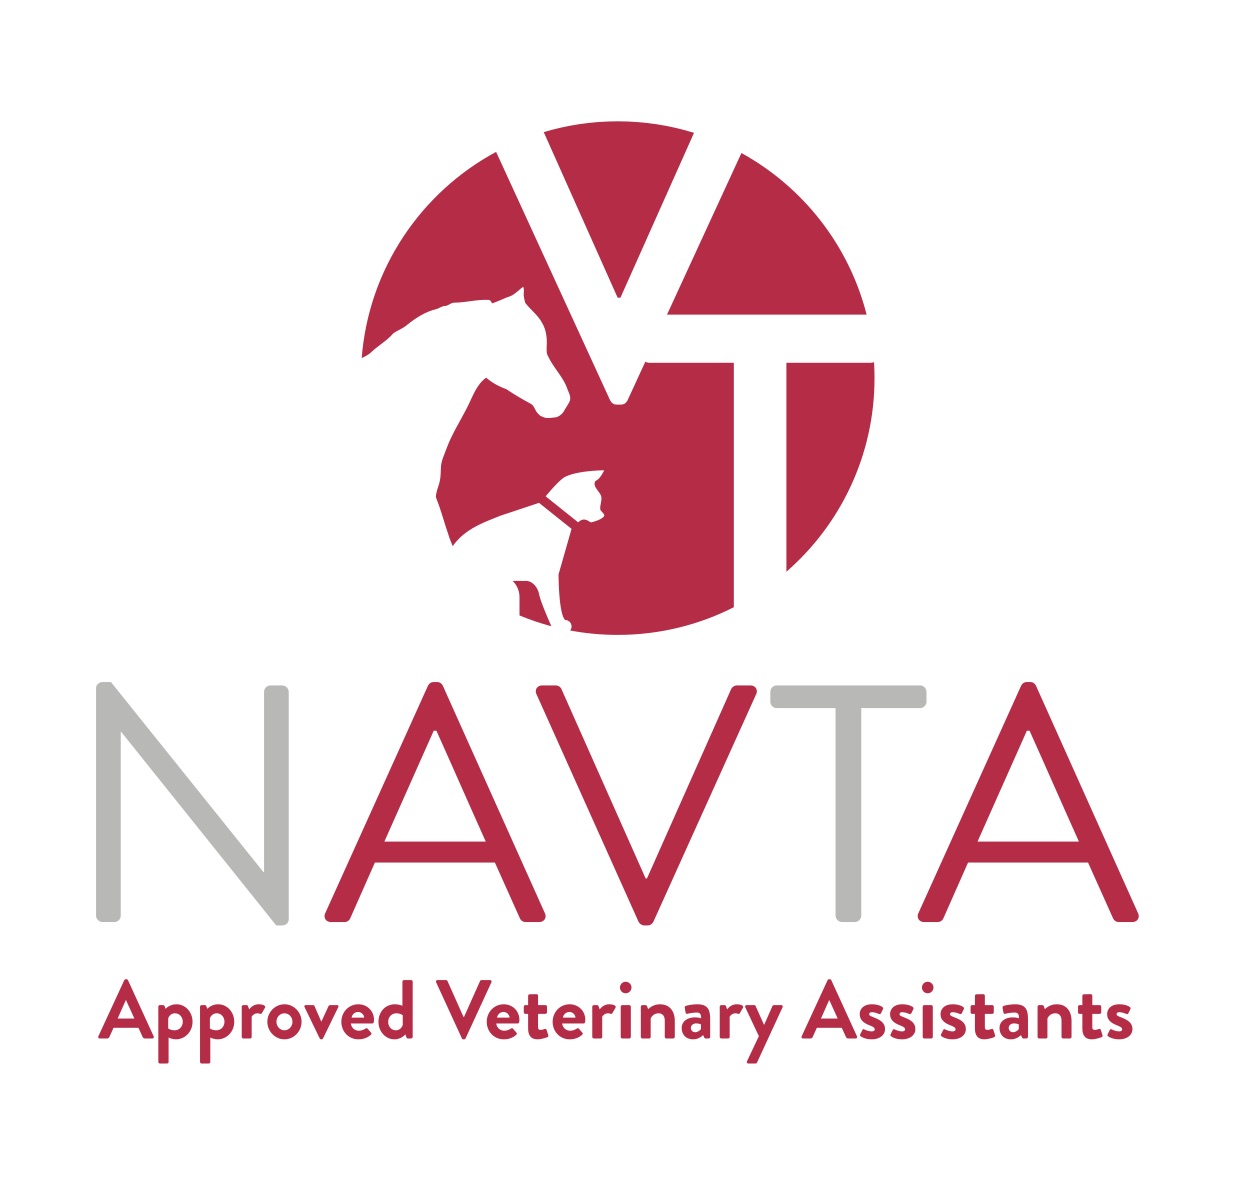 RCC is the only NAVTA-approved Veterinary Assistant program in the state and one of 28 programs approved at technical or community colleges nationwide.